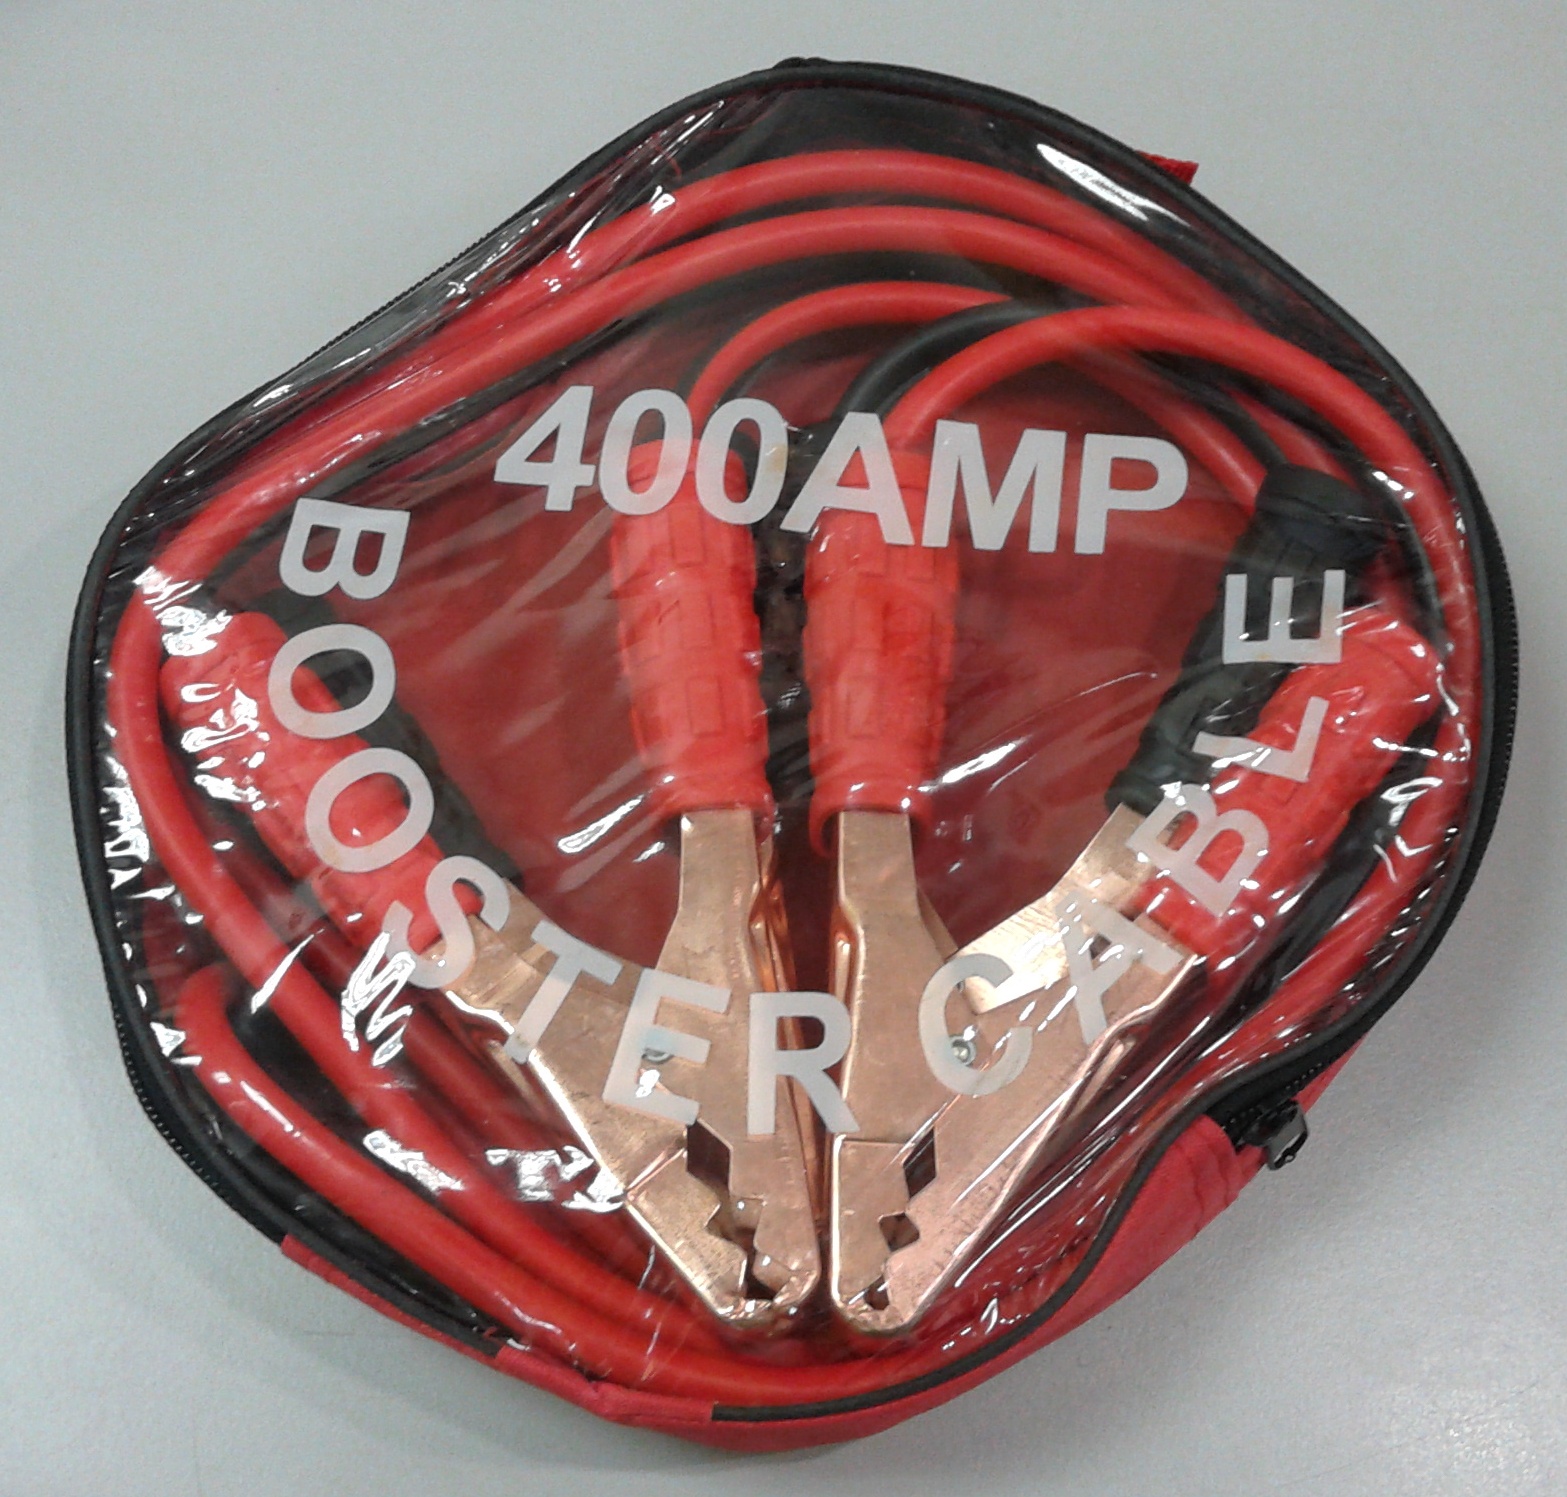 BOOSTER CABLES 12 400AMP LIGHT DUTY